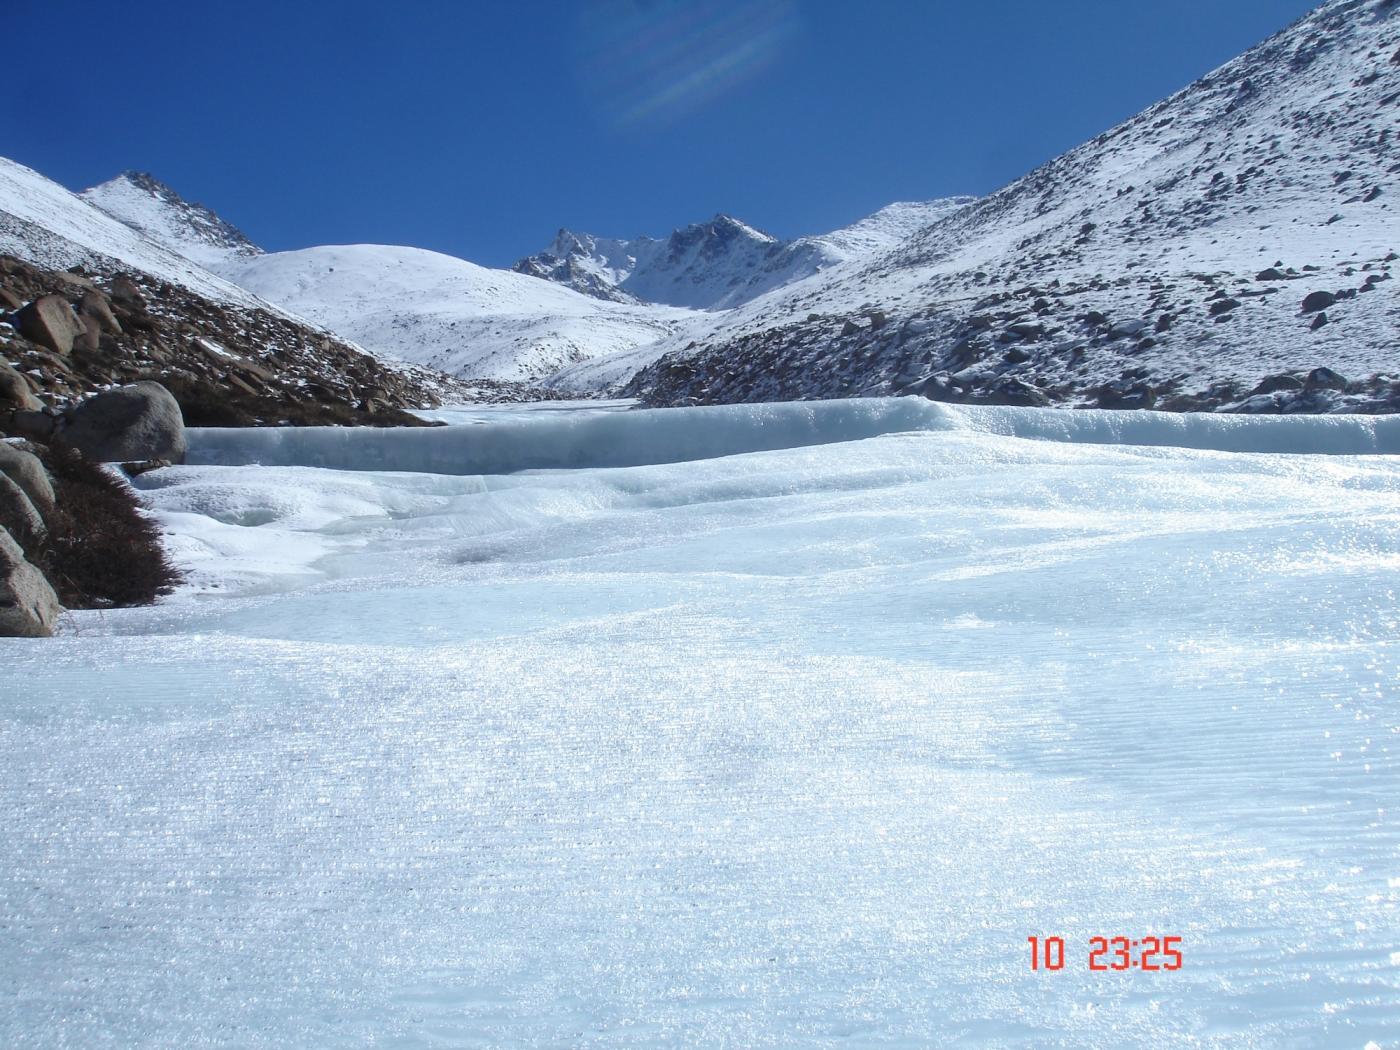 Norphel has created 17 artificial glaciers across Ladakh thereby solving the water woes of the region. by .